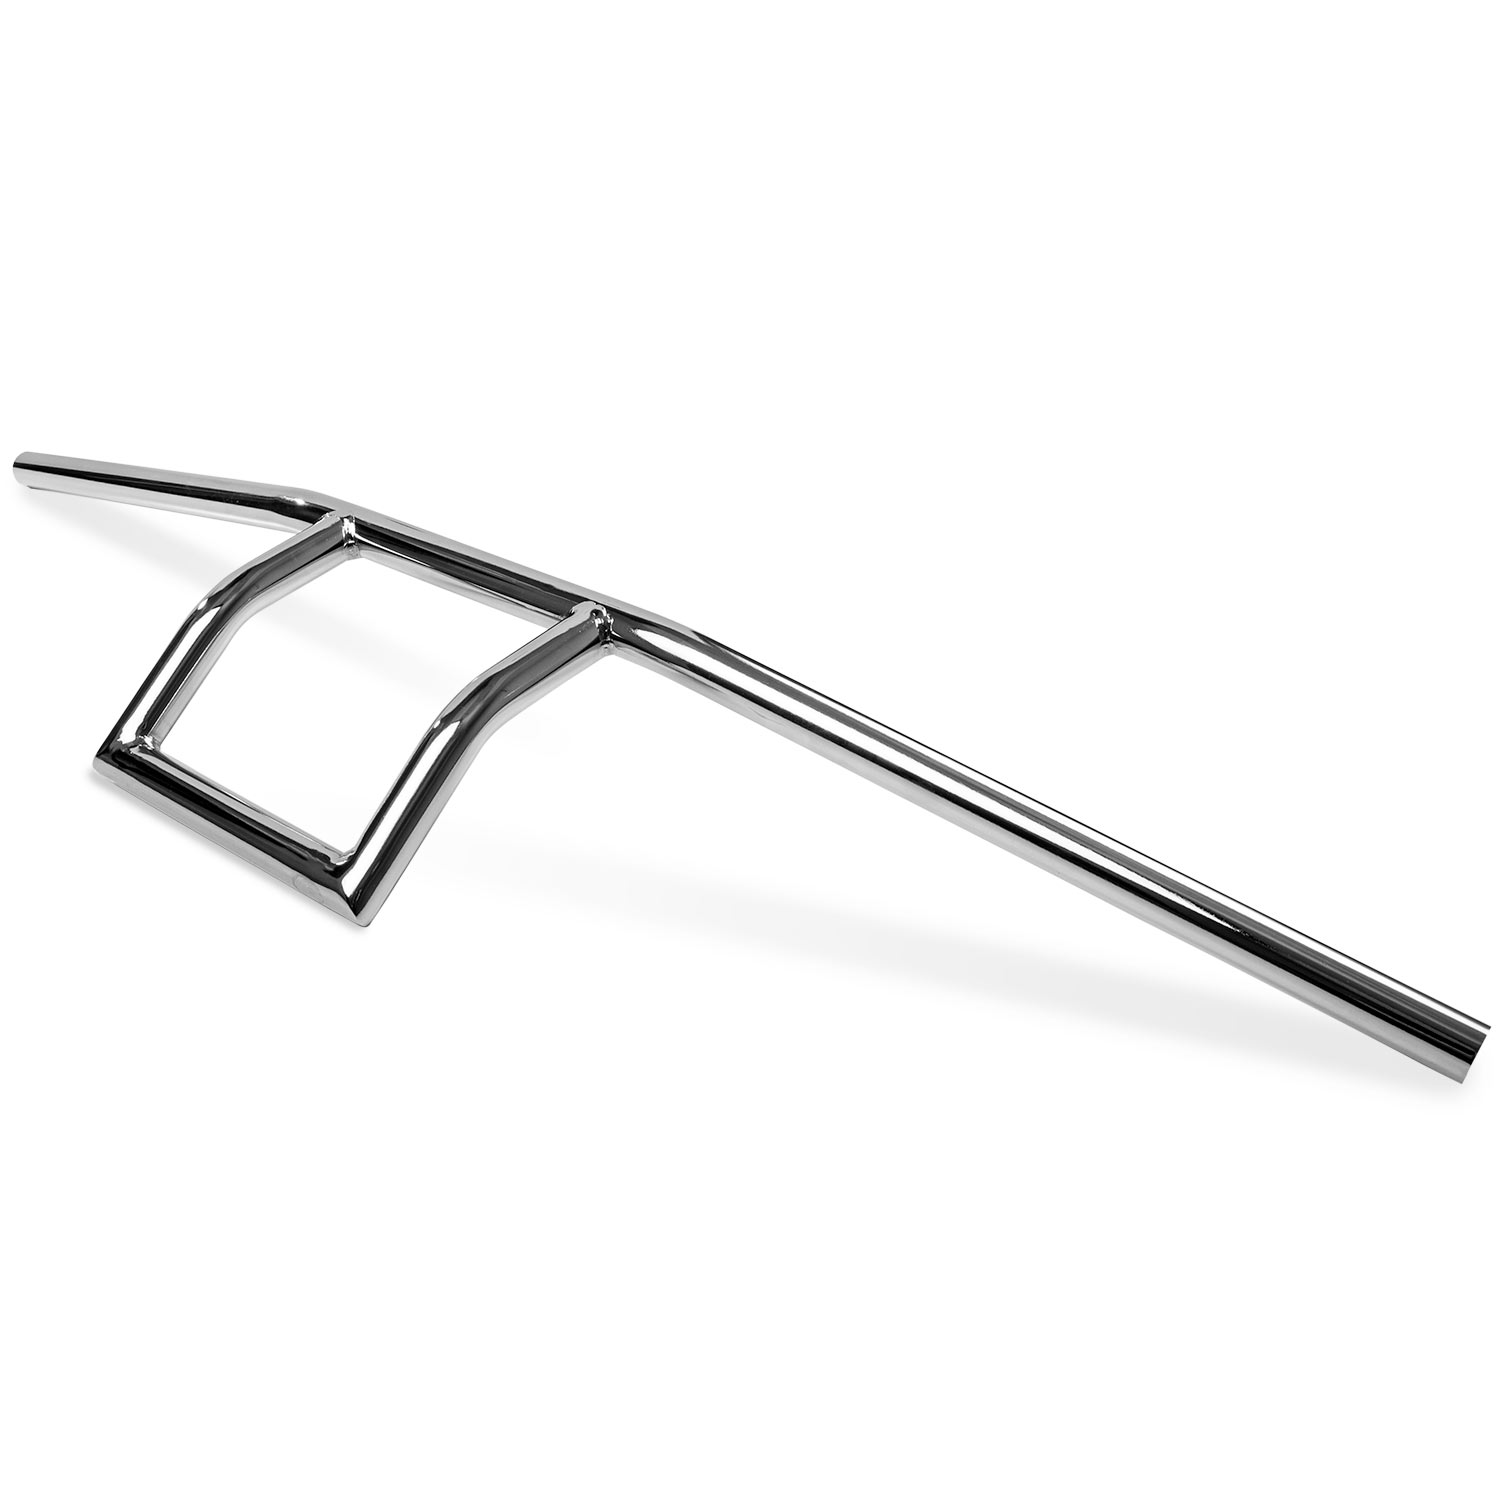 Krator Motorcycle Handlebar 7/8" Chrome Box Window Attack Style Compatible with Yamaha Royal Star Venture Classic Royale Deluxe